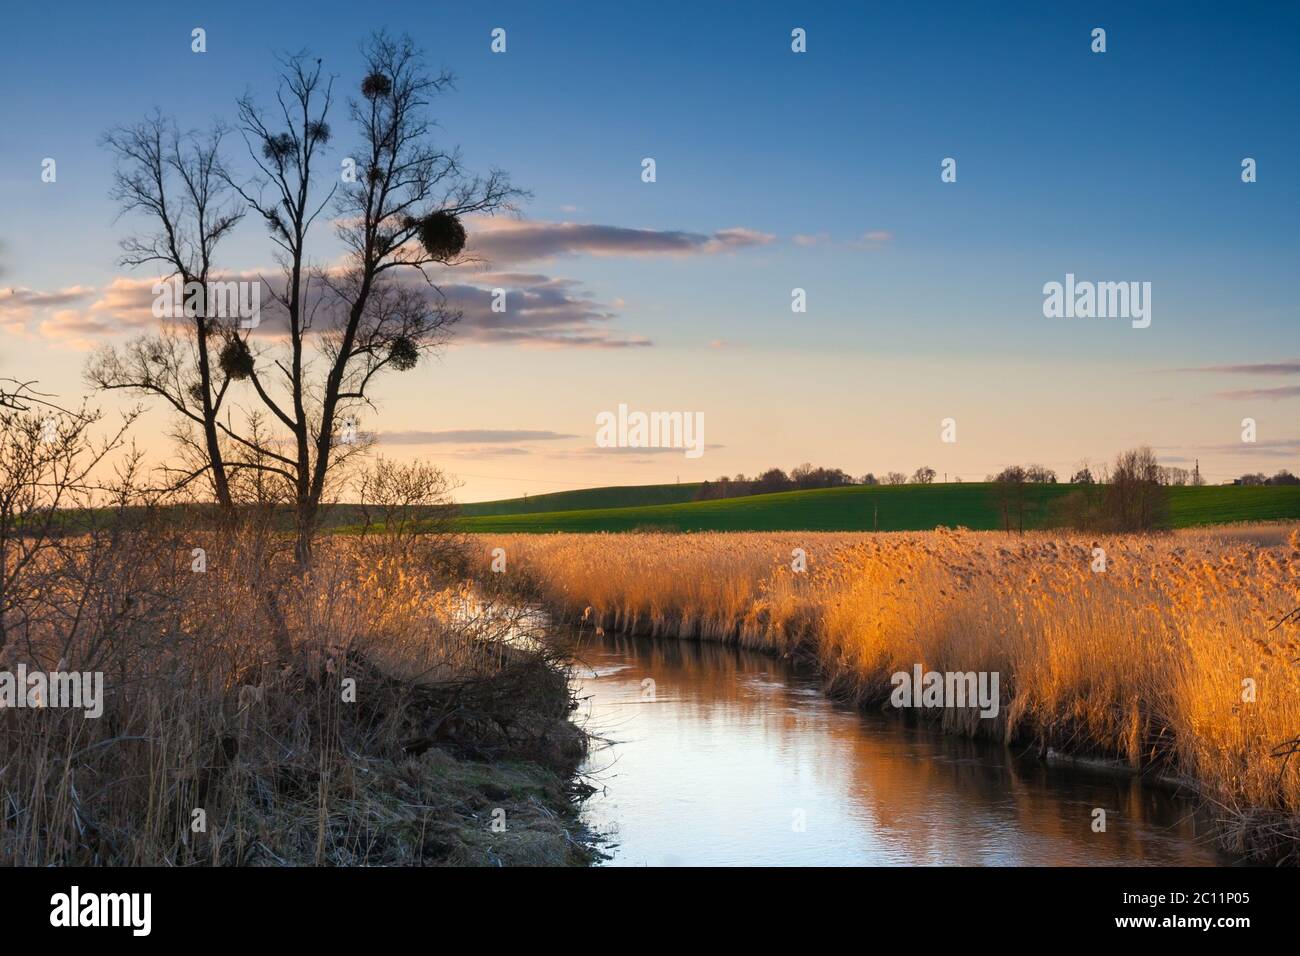 Landscape with river in countryside. Beautiful rural tranquil scene Stock Photo